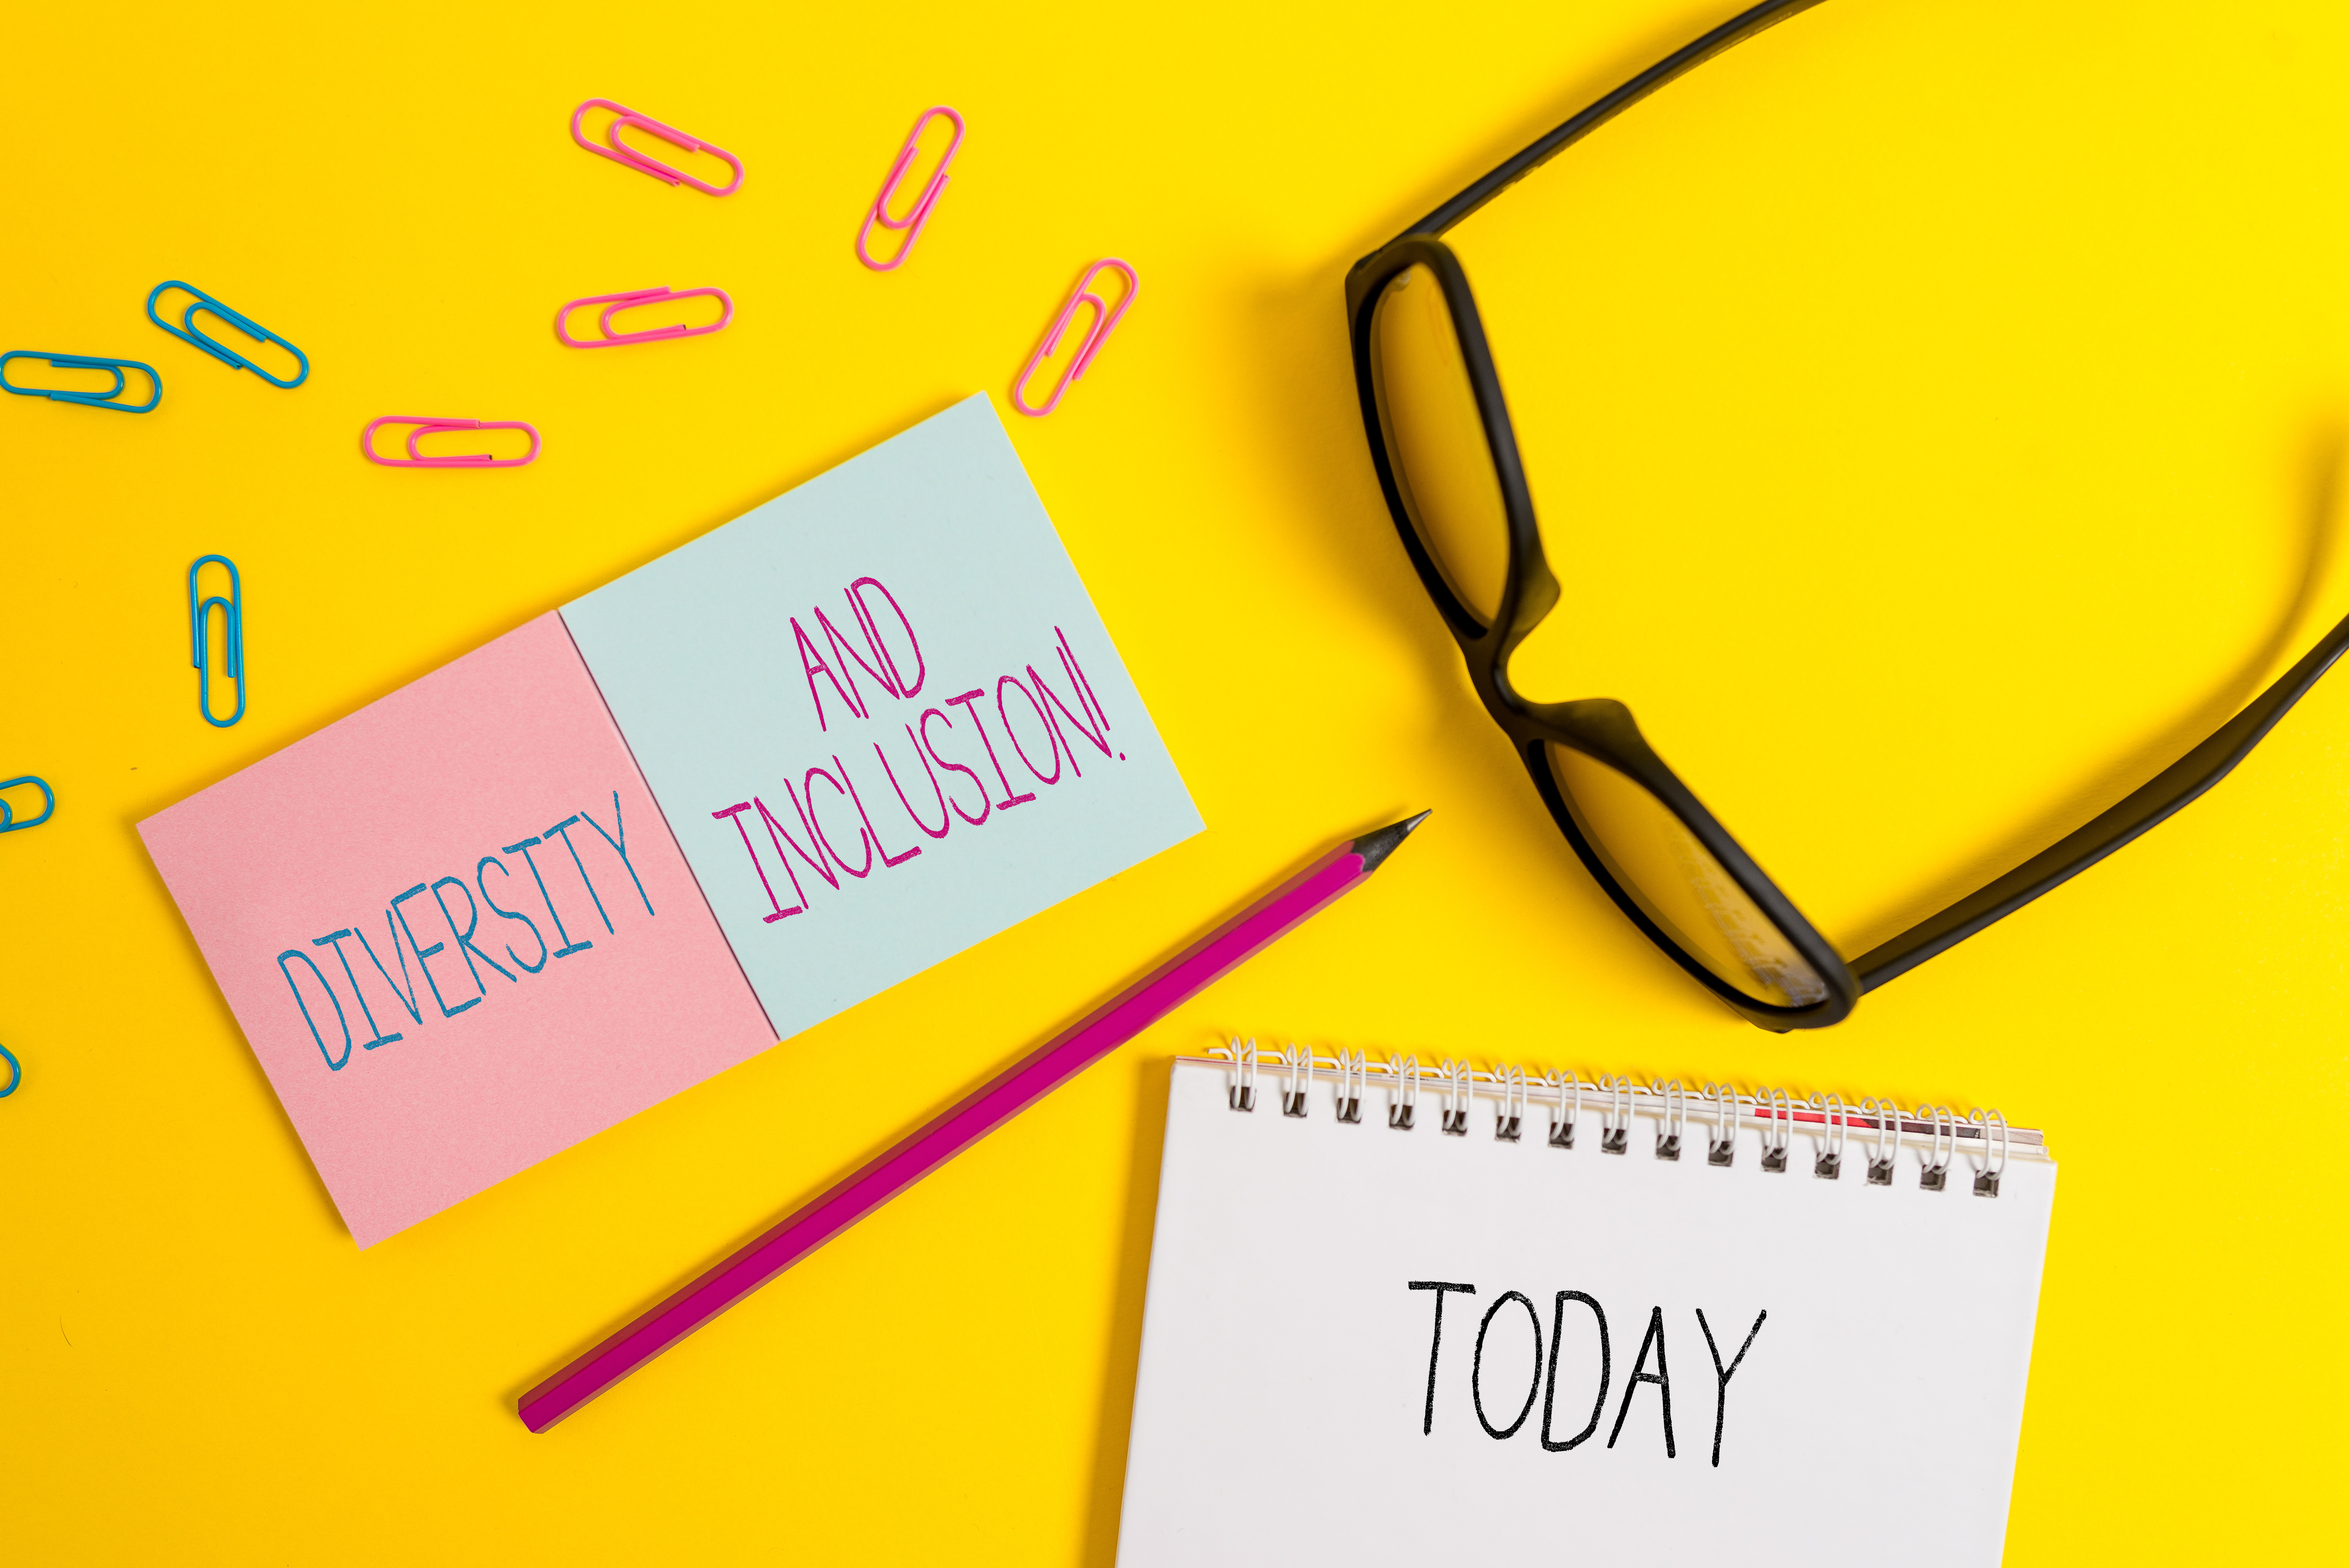 Yellow background with glasses, pencil, paper clips, and notepads saying, "DIVERSITY AND INCLUSION TODAY!"